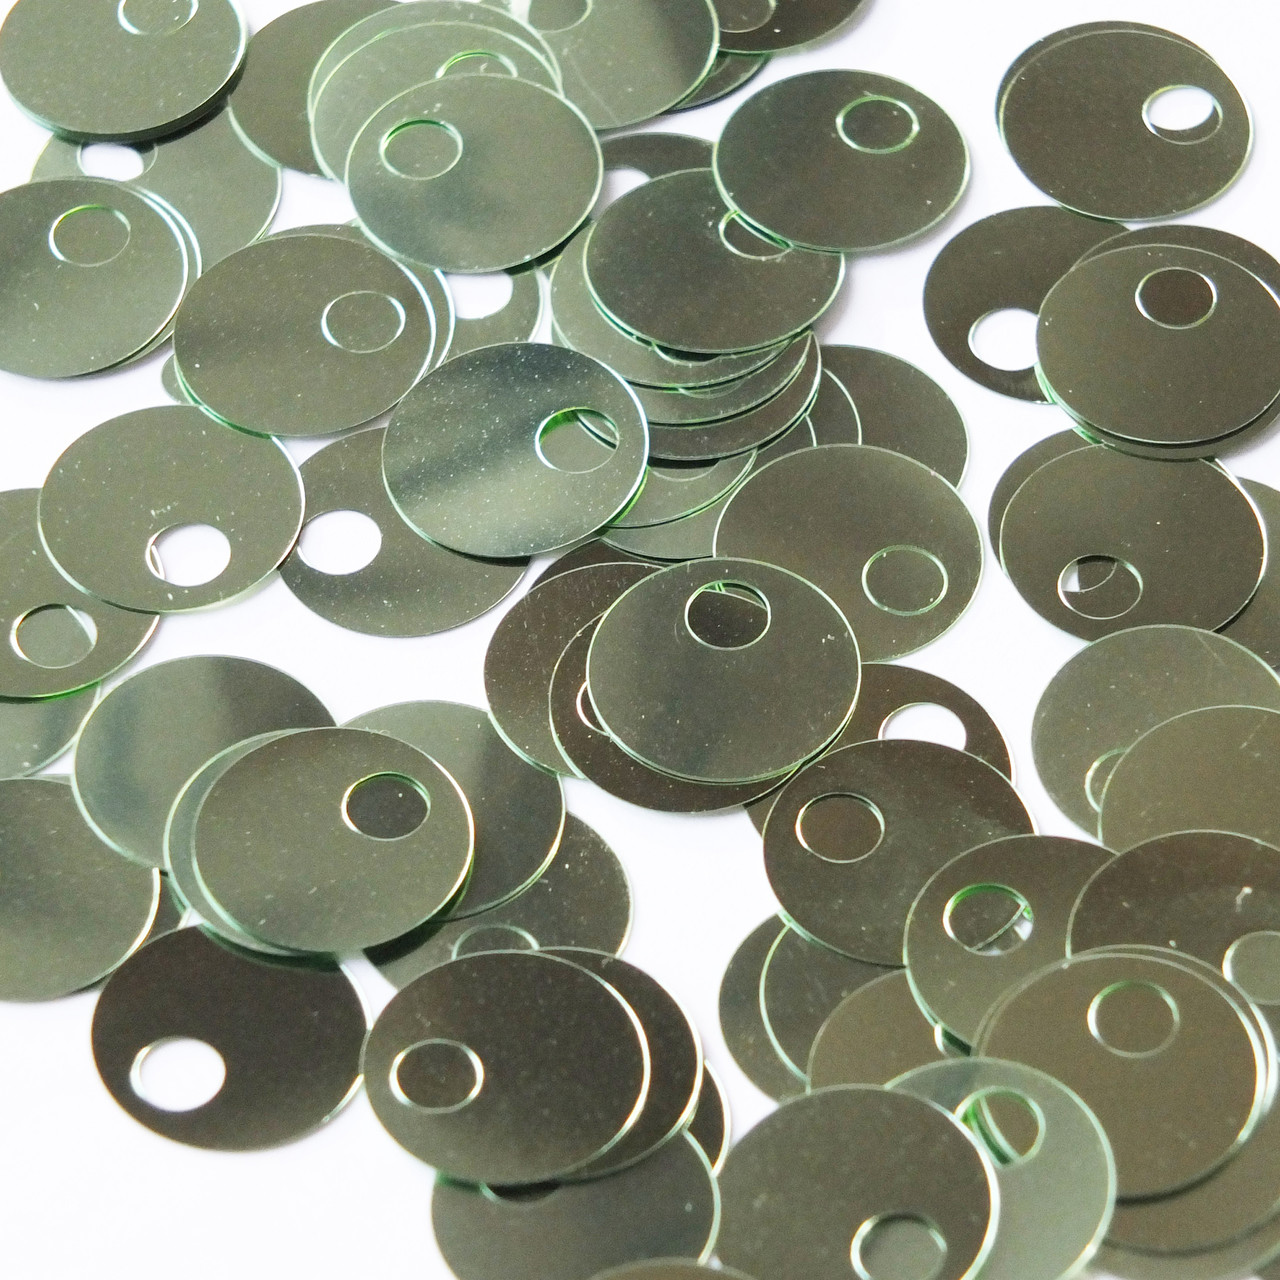 Large Hole Round Sequin 20mm Pale Green Metallic